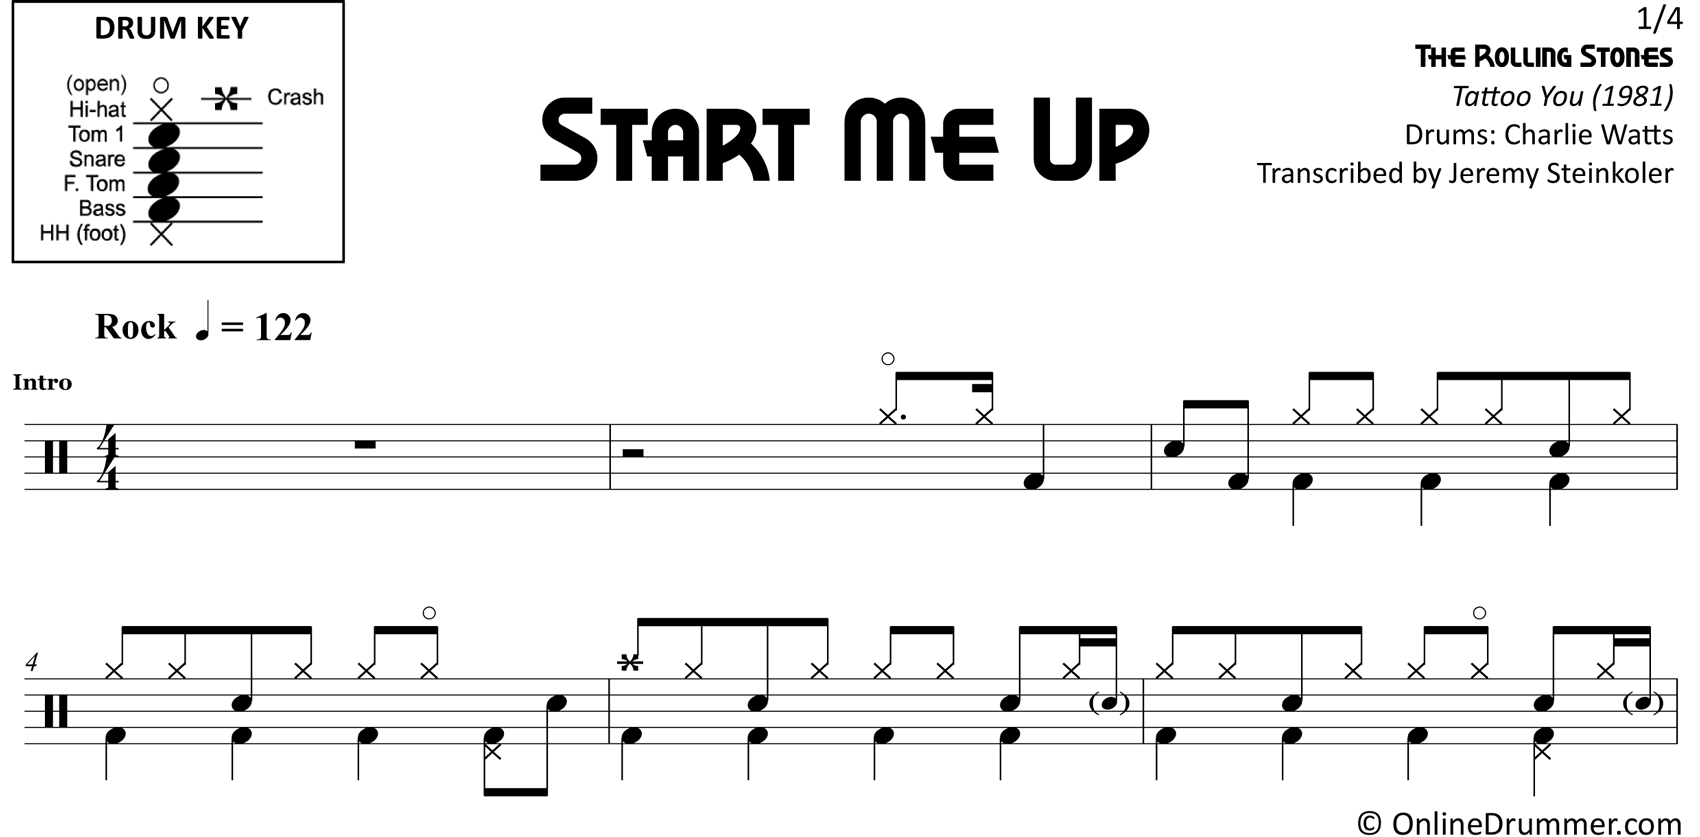 Start Me Up - The Rolling Stones - Drum Sheet Music